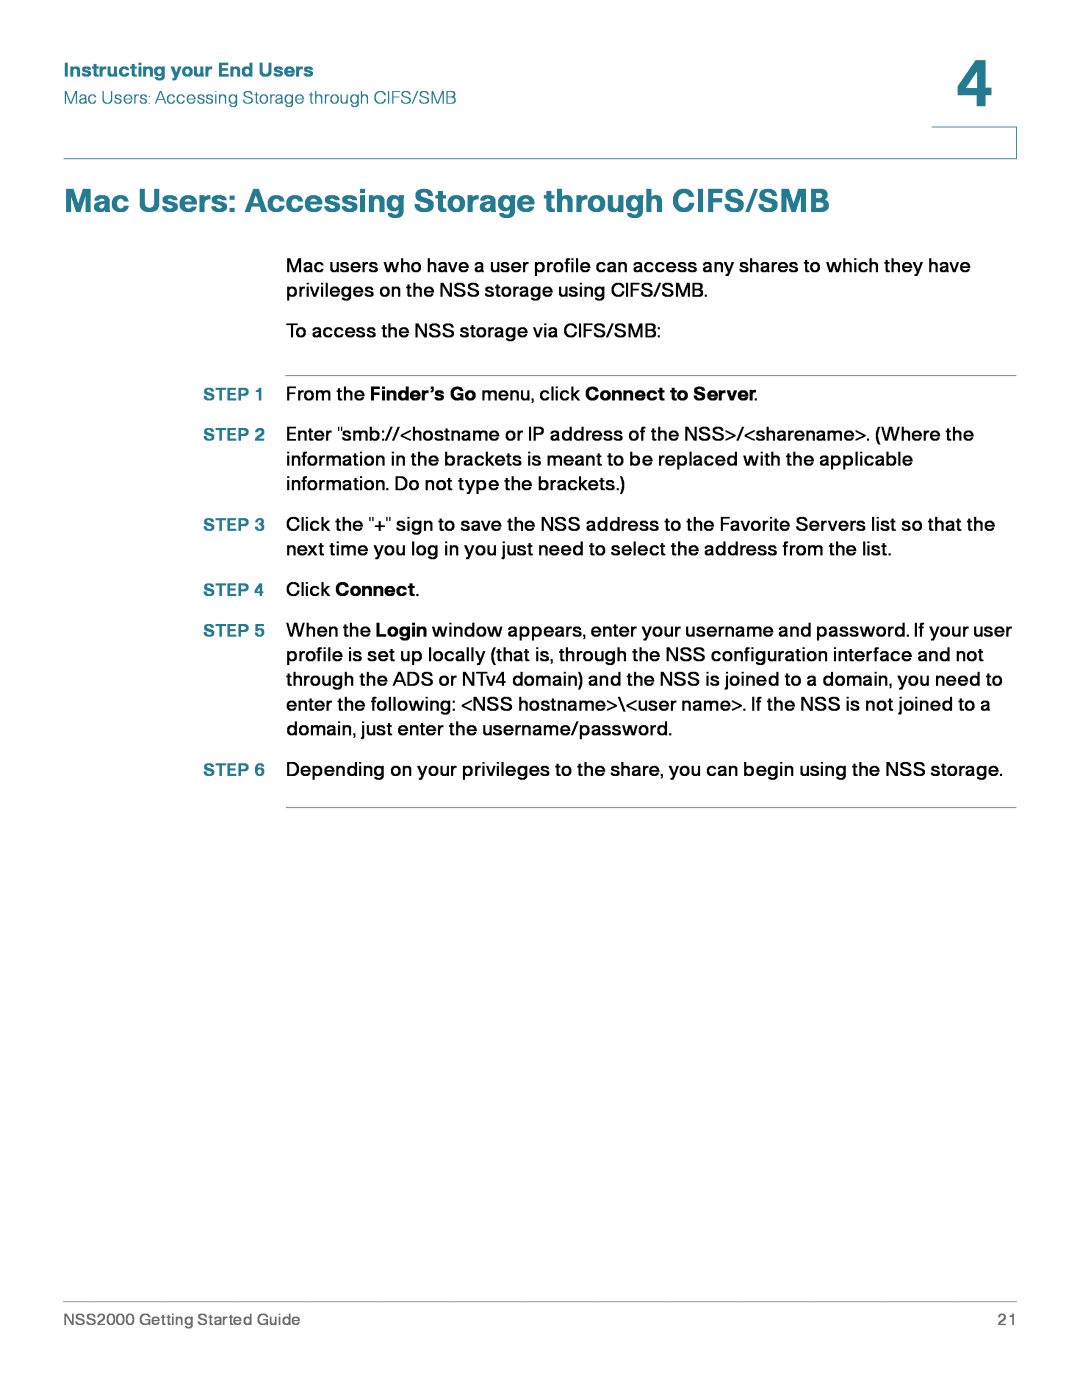 Cisco Systems NSS2000 Series manual Mac Users Accessing Storage through CIFS/SMB, Instructing your End Users 